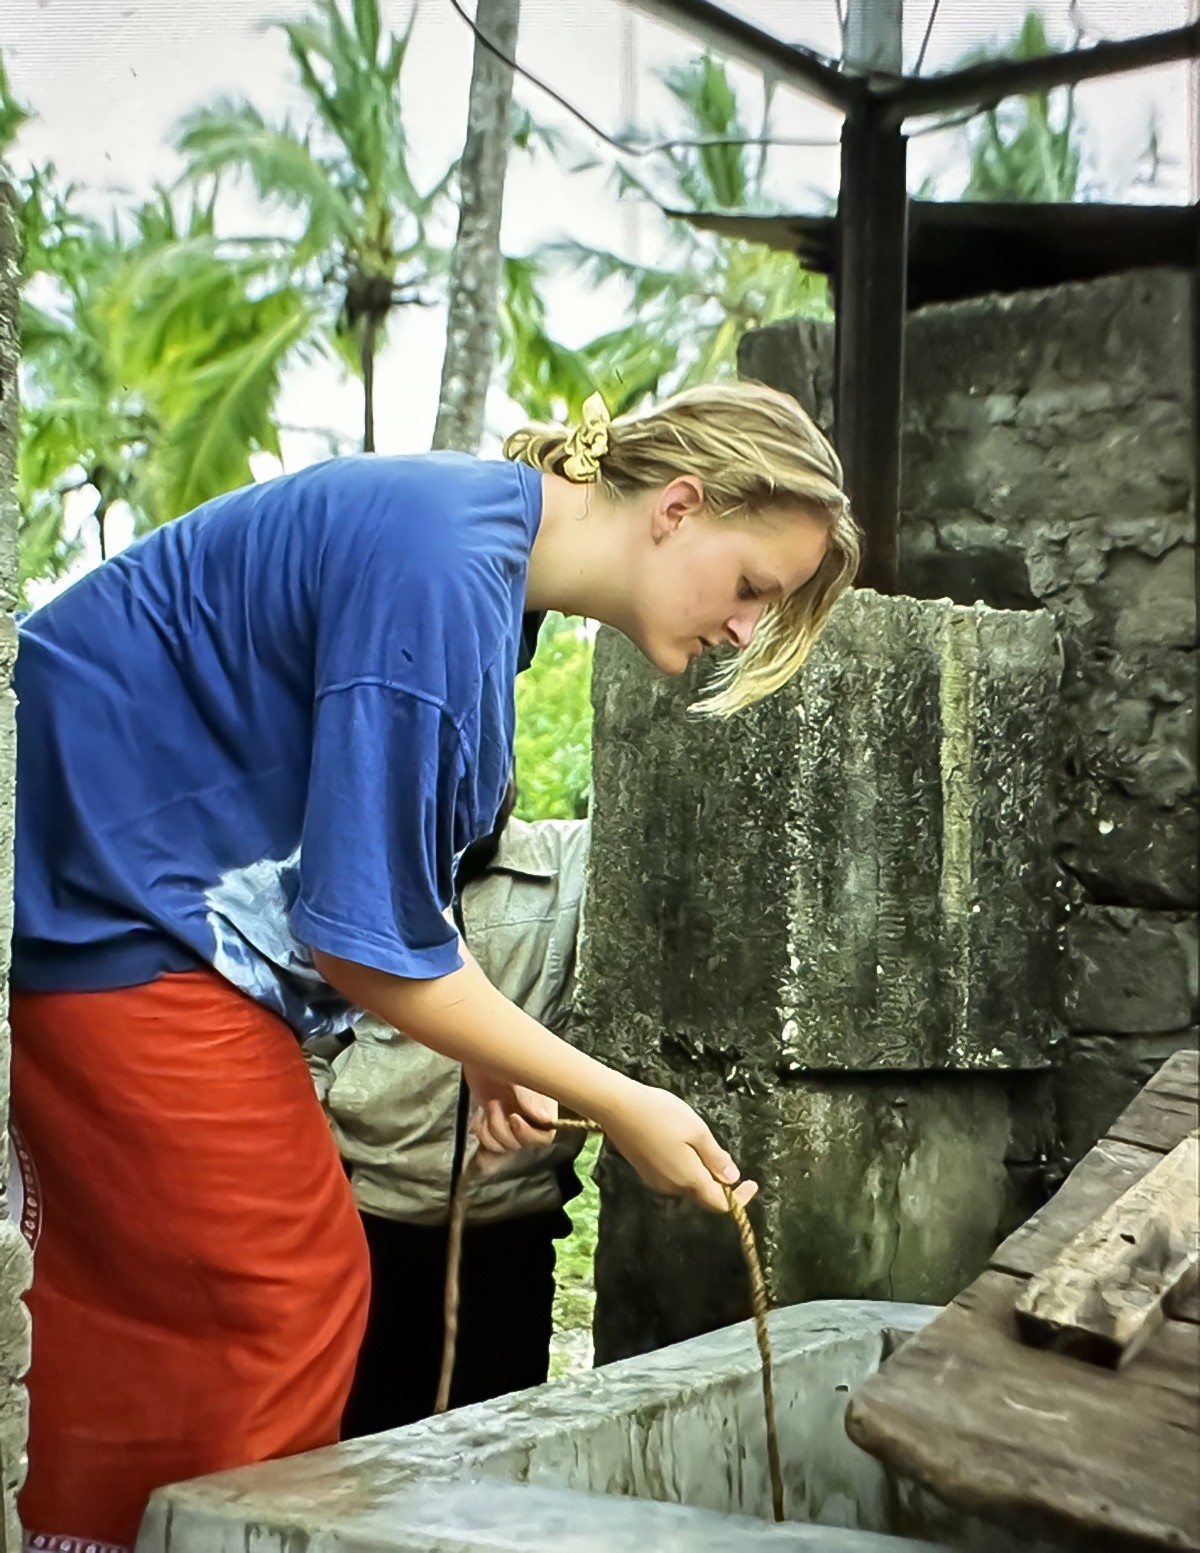 As part of the overseas work, Katrin helped develop the town of Uroa, Zanzibar Island. Living in the East African village meant drawing water for cooking, cleaning, and construction. She was also involved in establishing a medical station in the town.